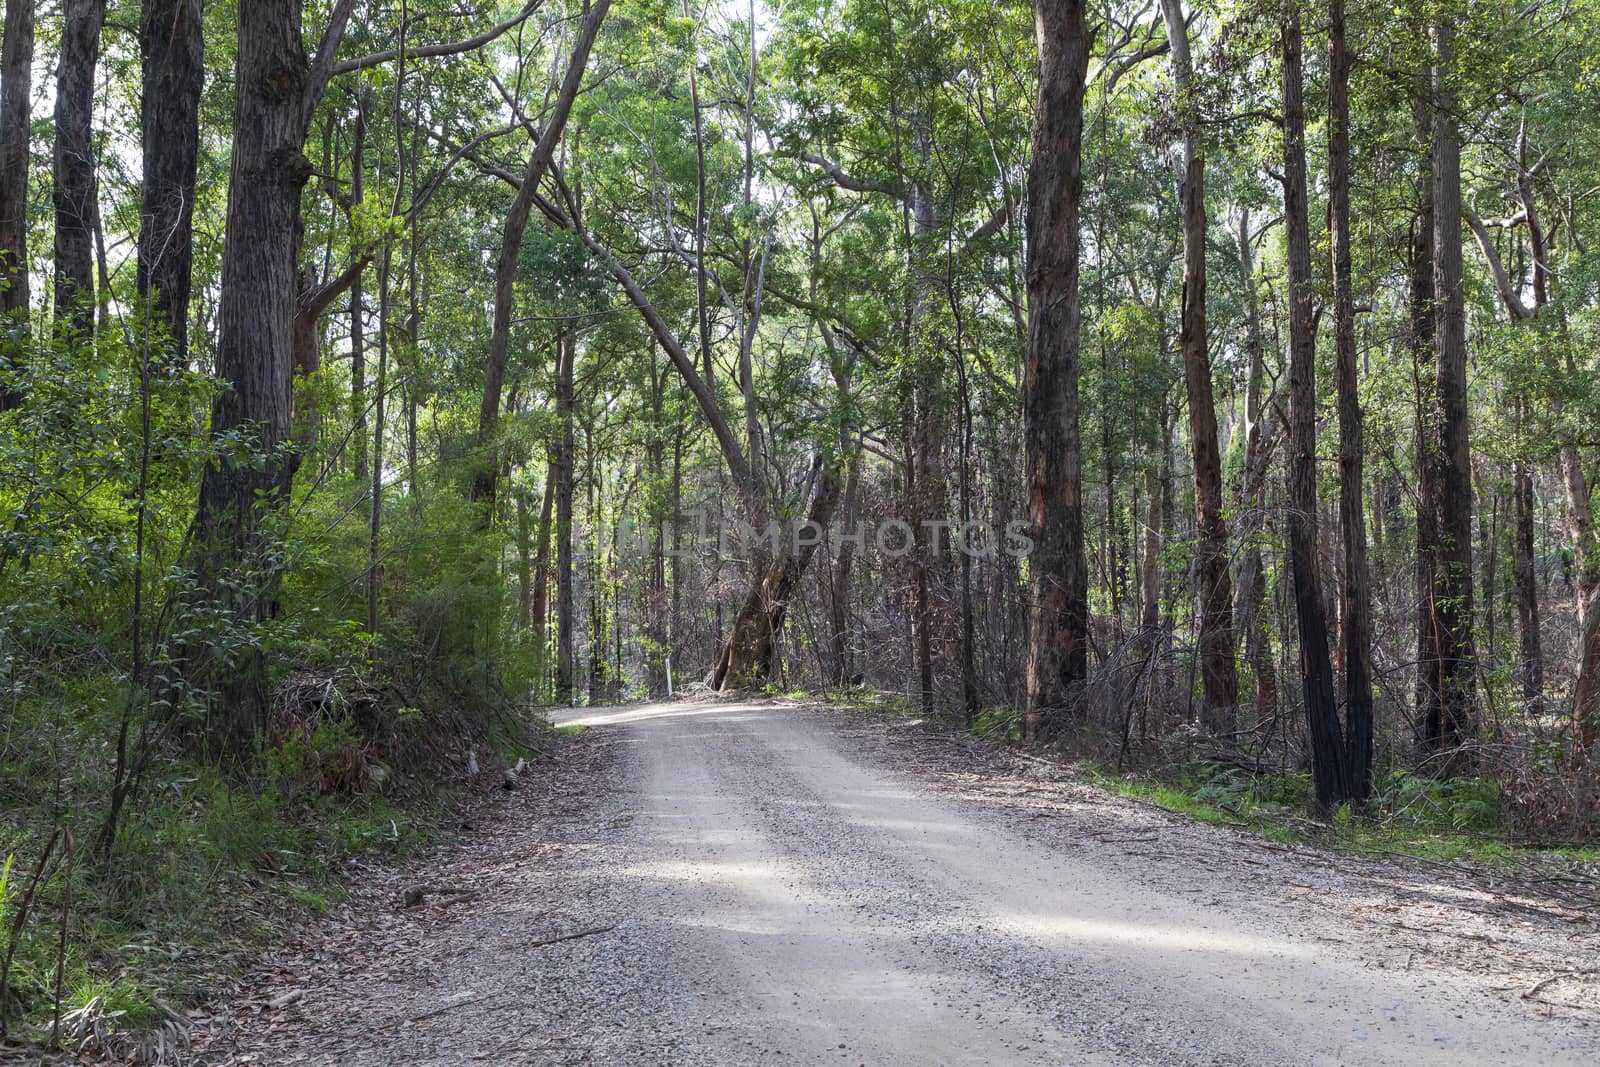 A dirt track in the Wollemi National Park in regional New South Wales in Australia